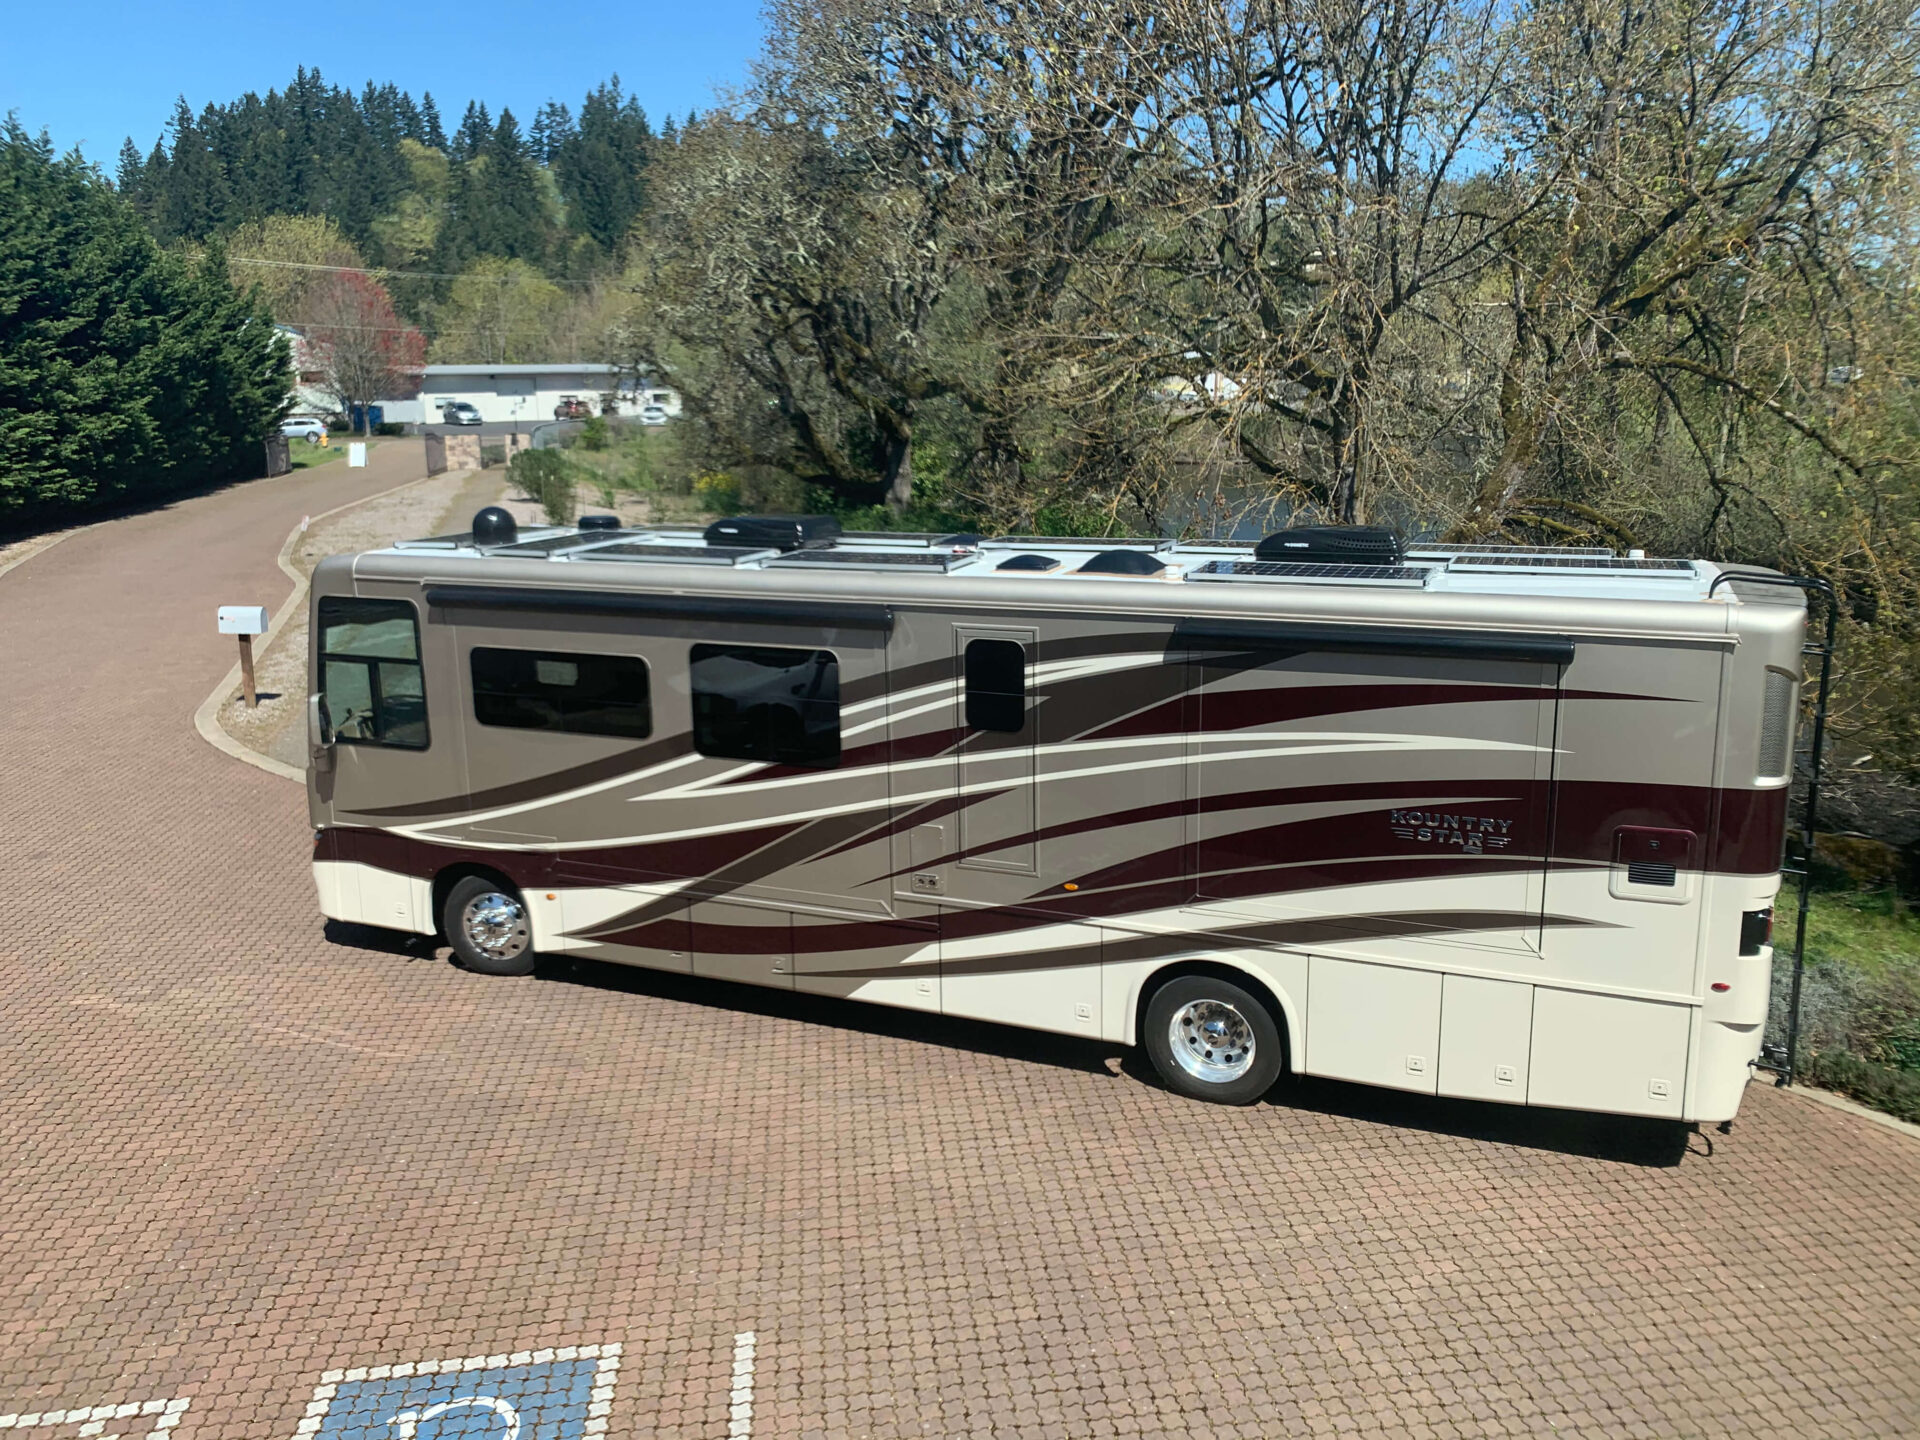 RV with solar panels installed on the top.